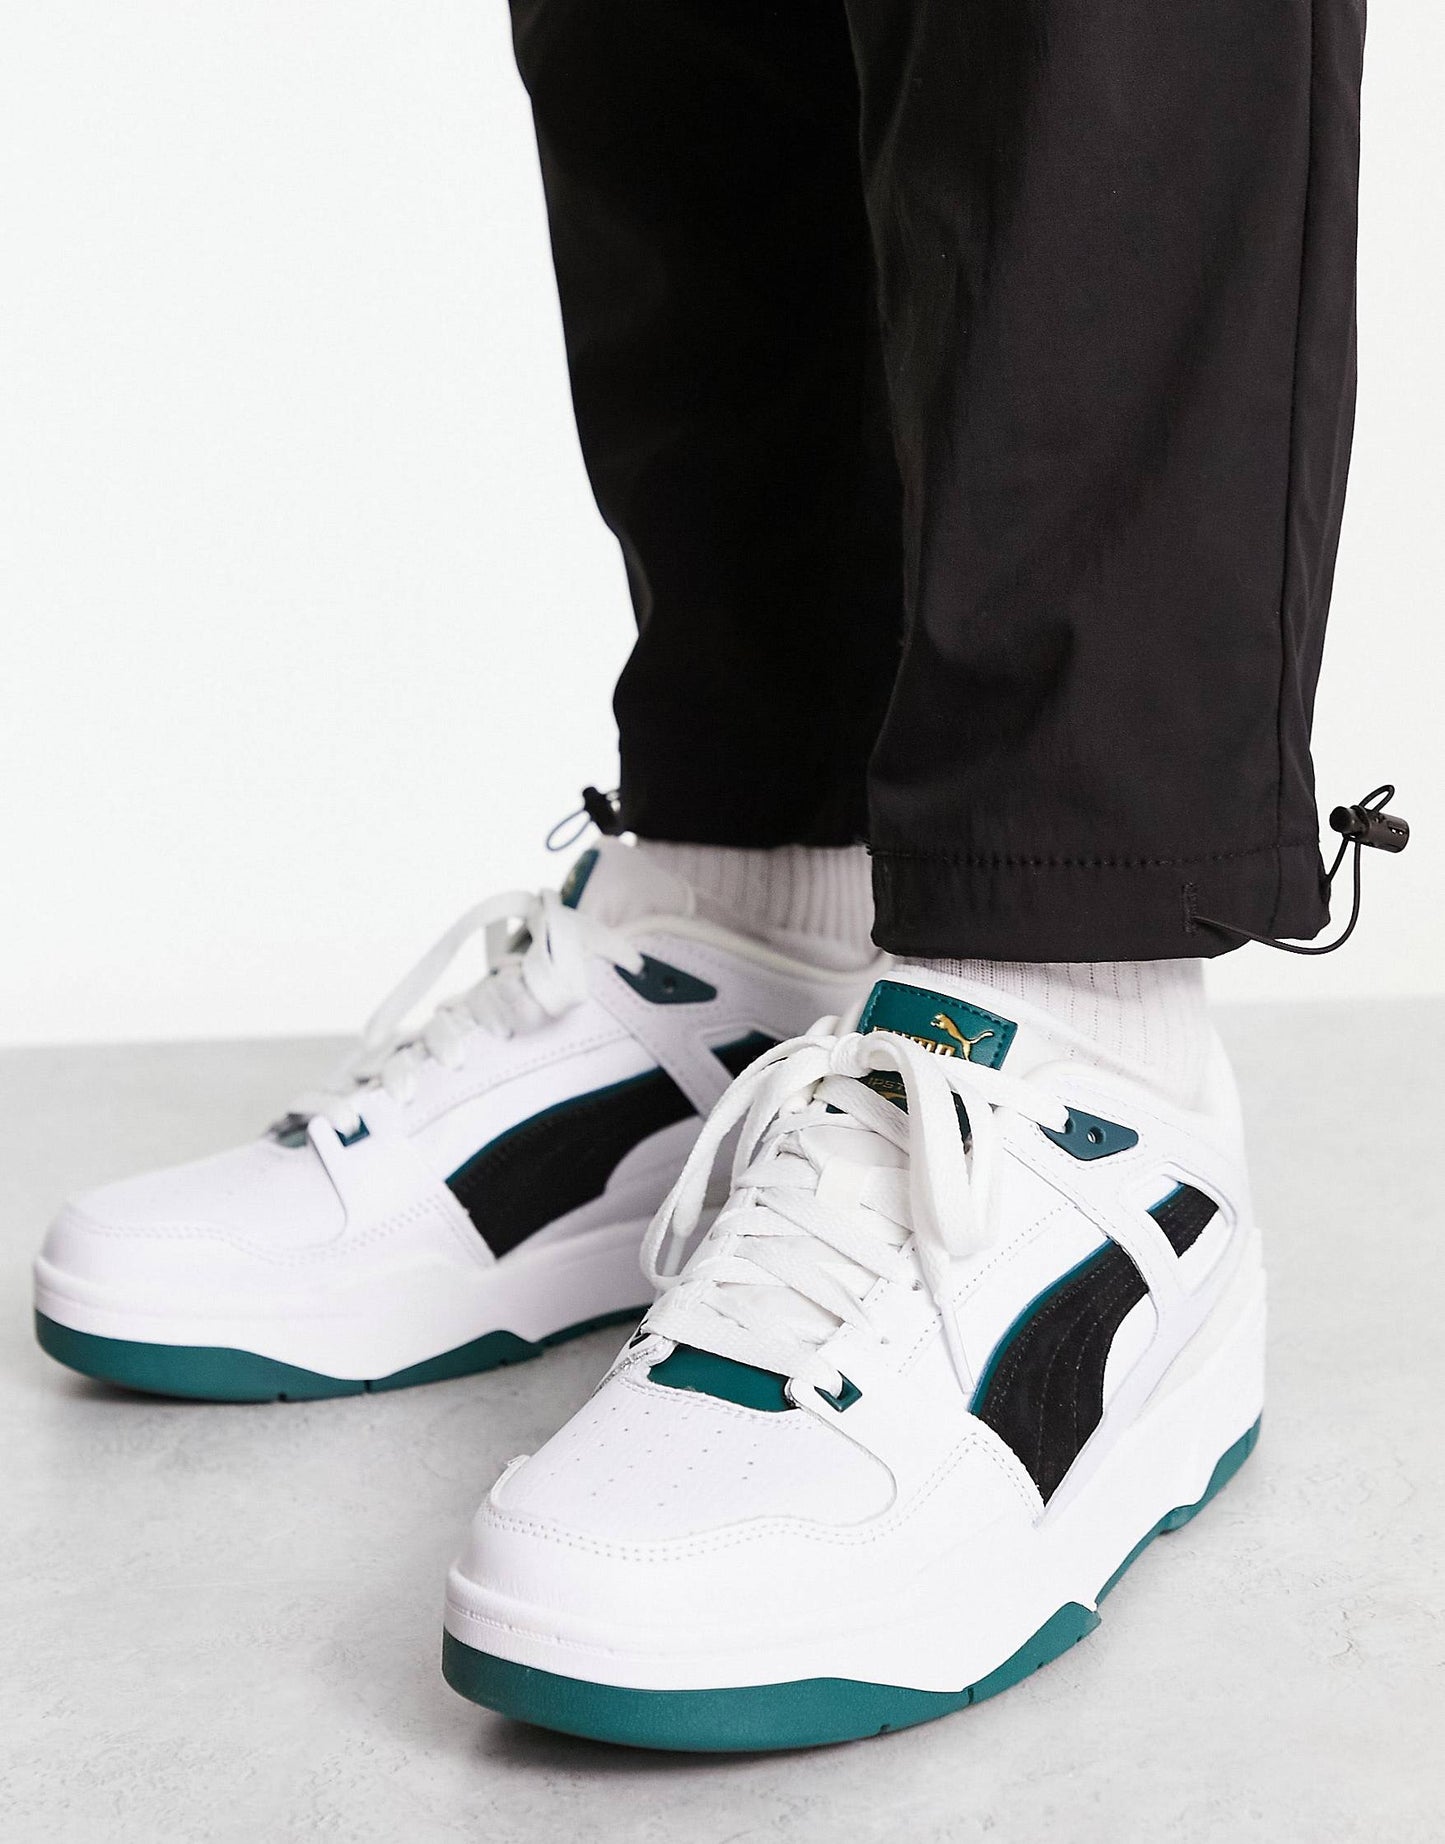 Puma slipstream trainers in white with black and green suede detail